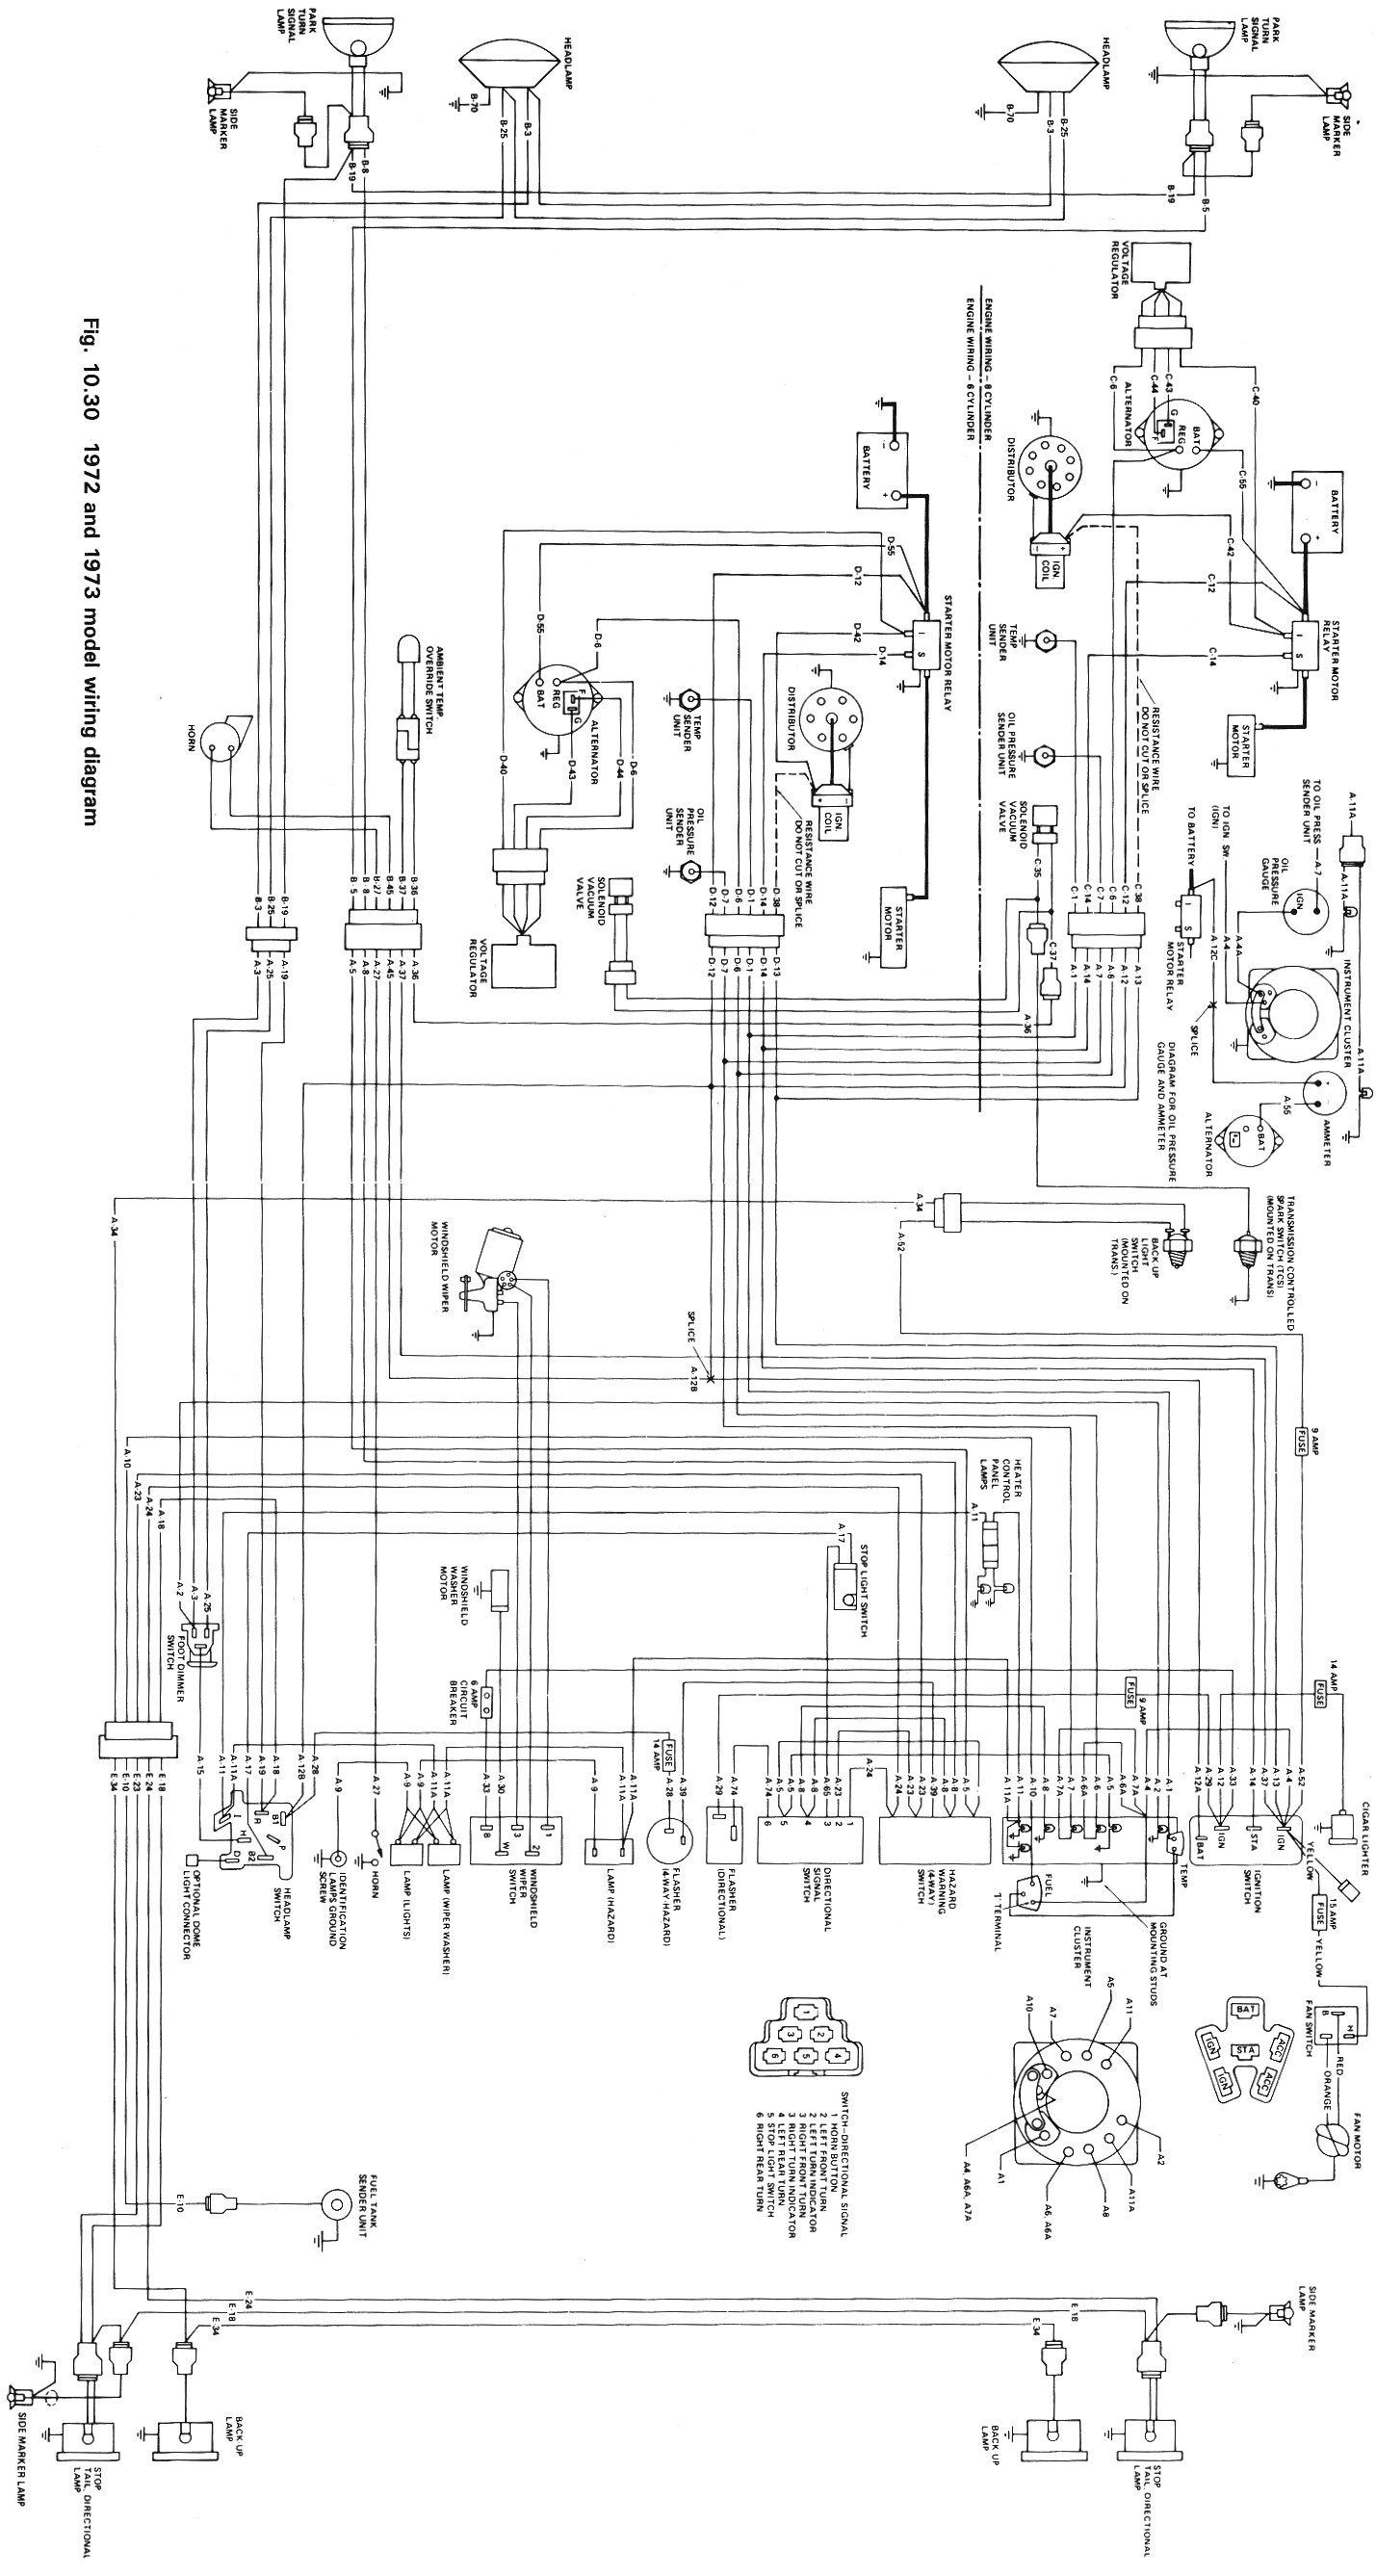 Wiring Diagram Jeep Cj 72 73 Electrical Schematic For Jeep Wiring Diagrams